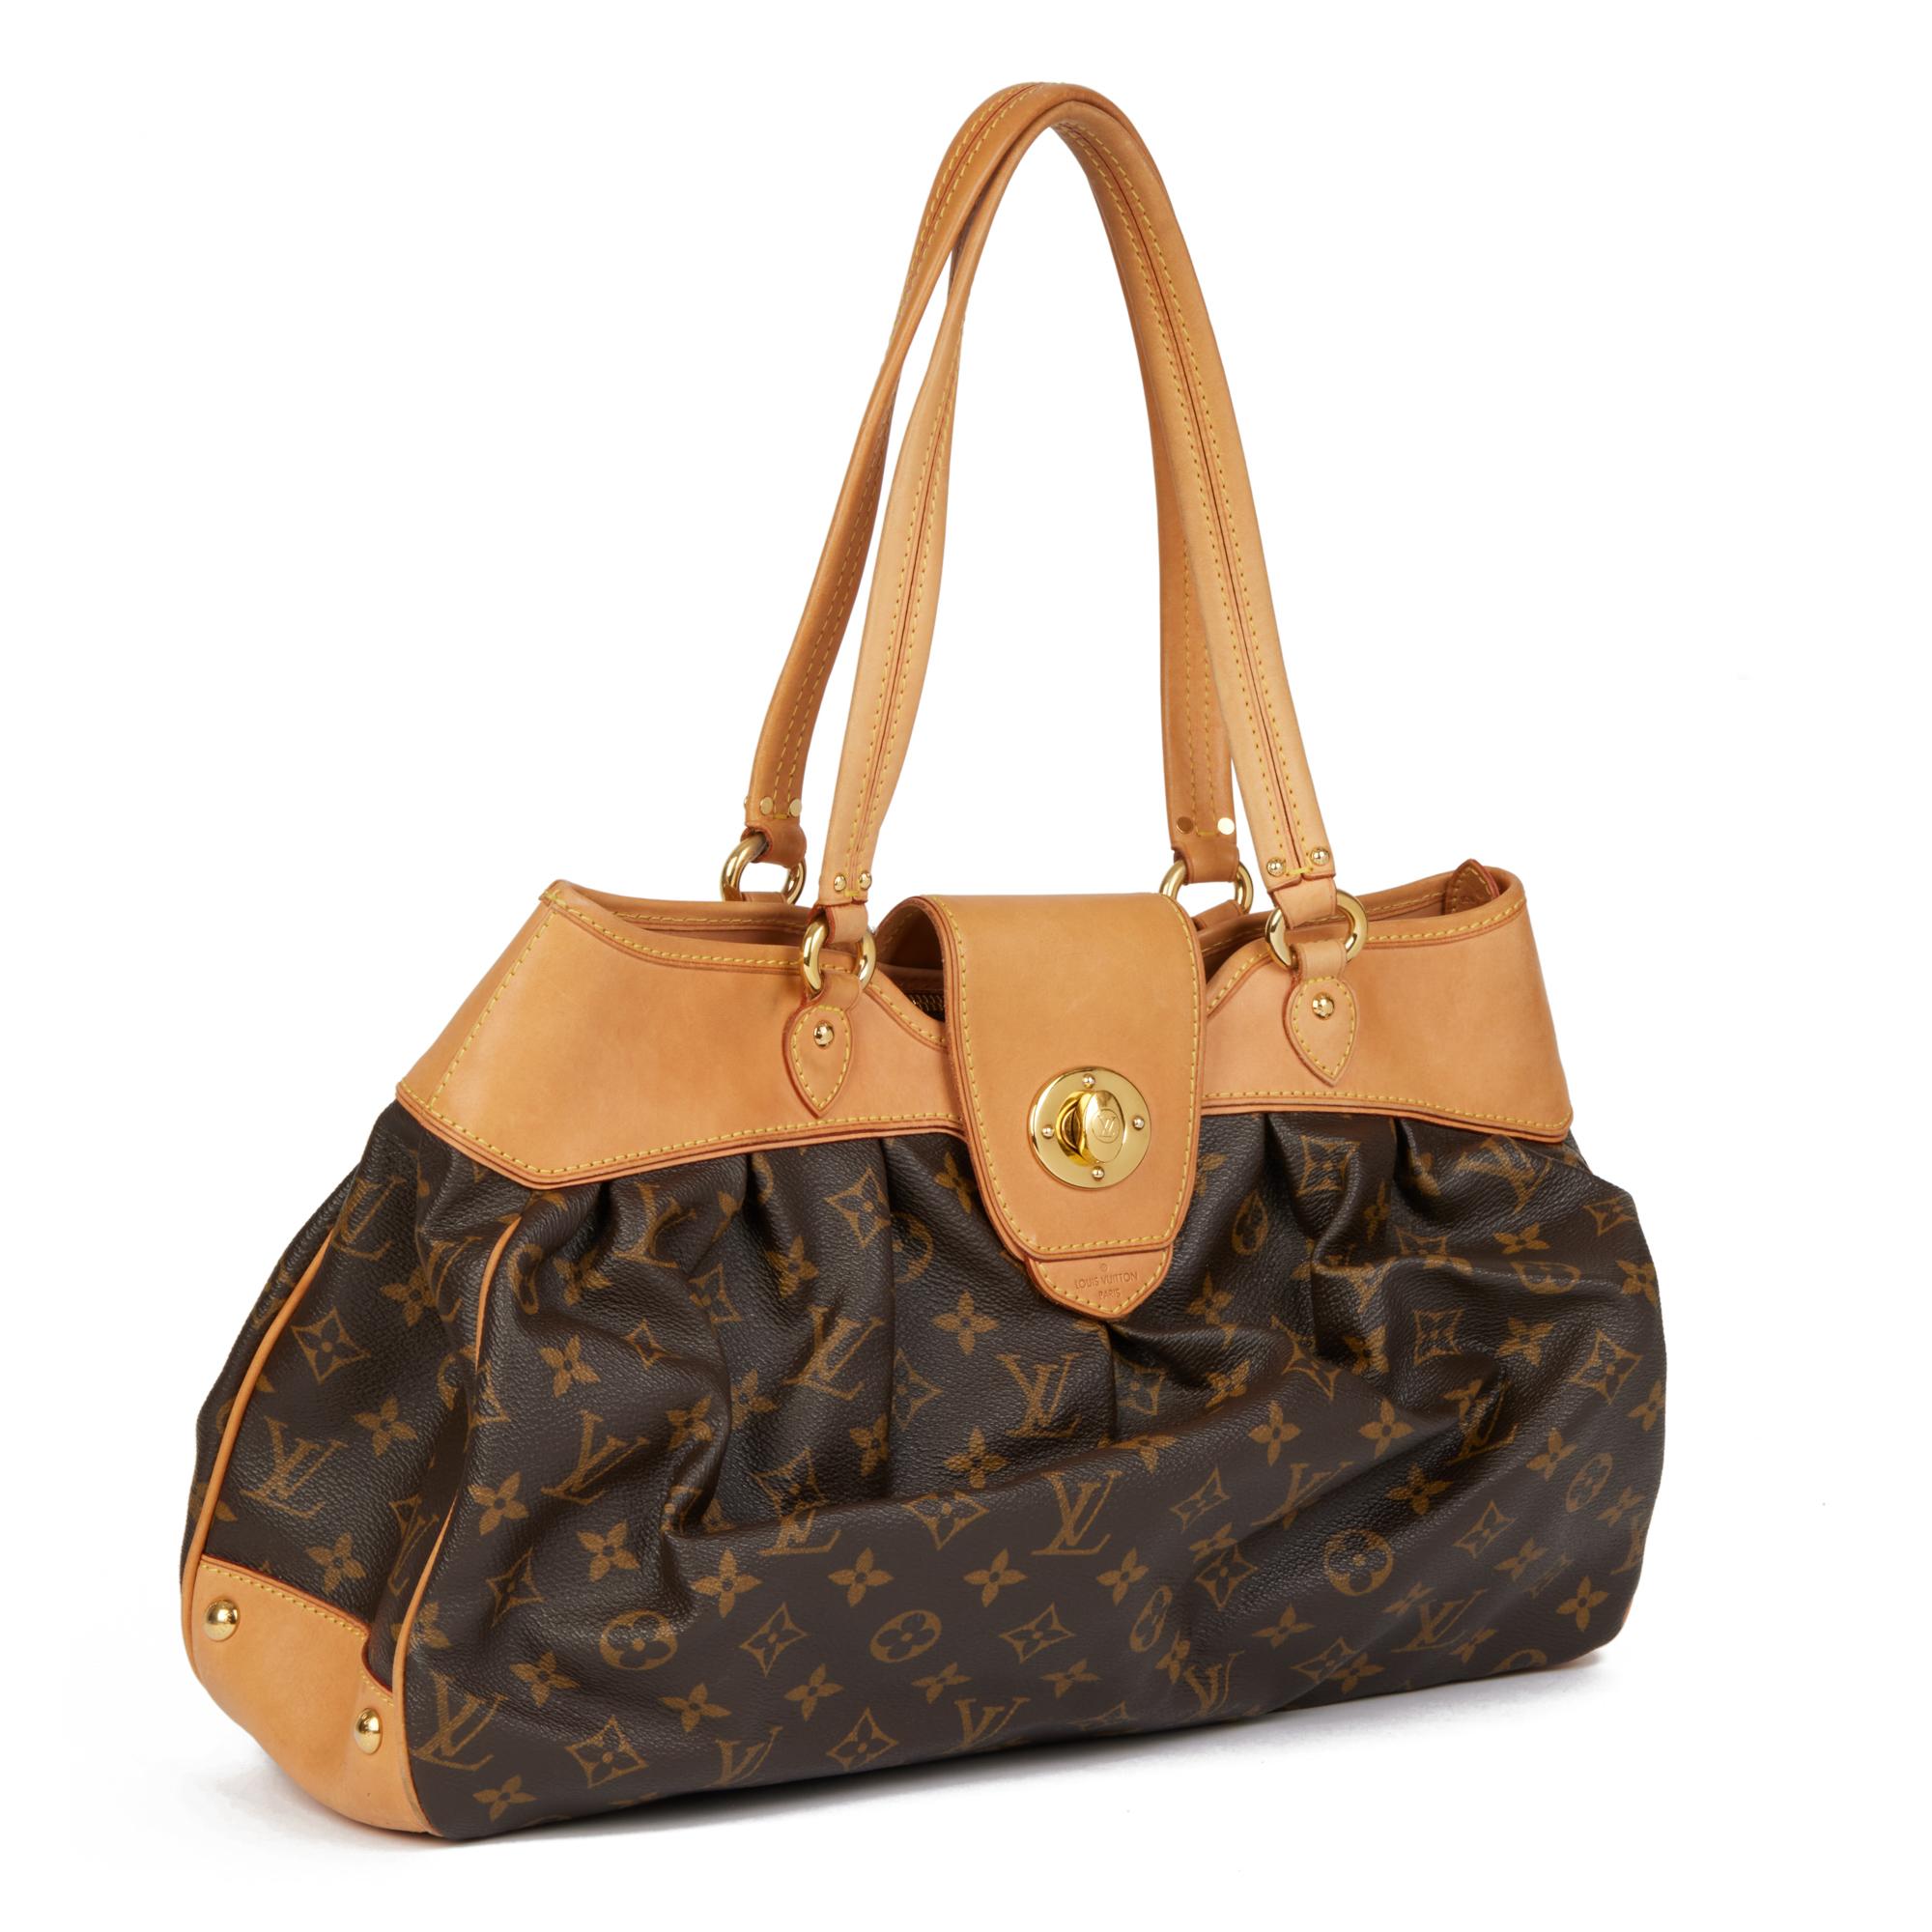 LOUIS VUITTON
Brown Monogram Coated Canvas & Vachetta Leather Vintage Boetie

Serial Number: SR2010
Age (Circa): 2000
Accompanied By: Louis Vuitton Dust Bag
Authenticity Details: Date Stamp (Made in France)
Gender: Ladies
Type: Shoulder,